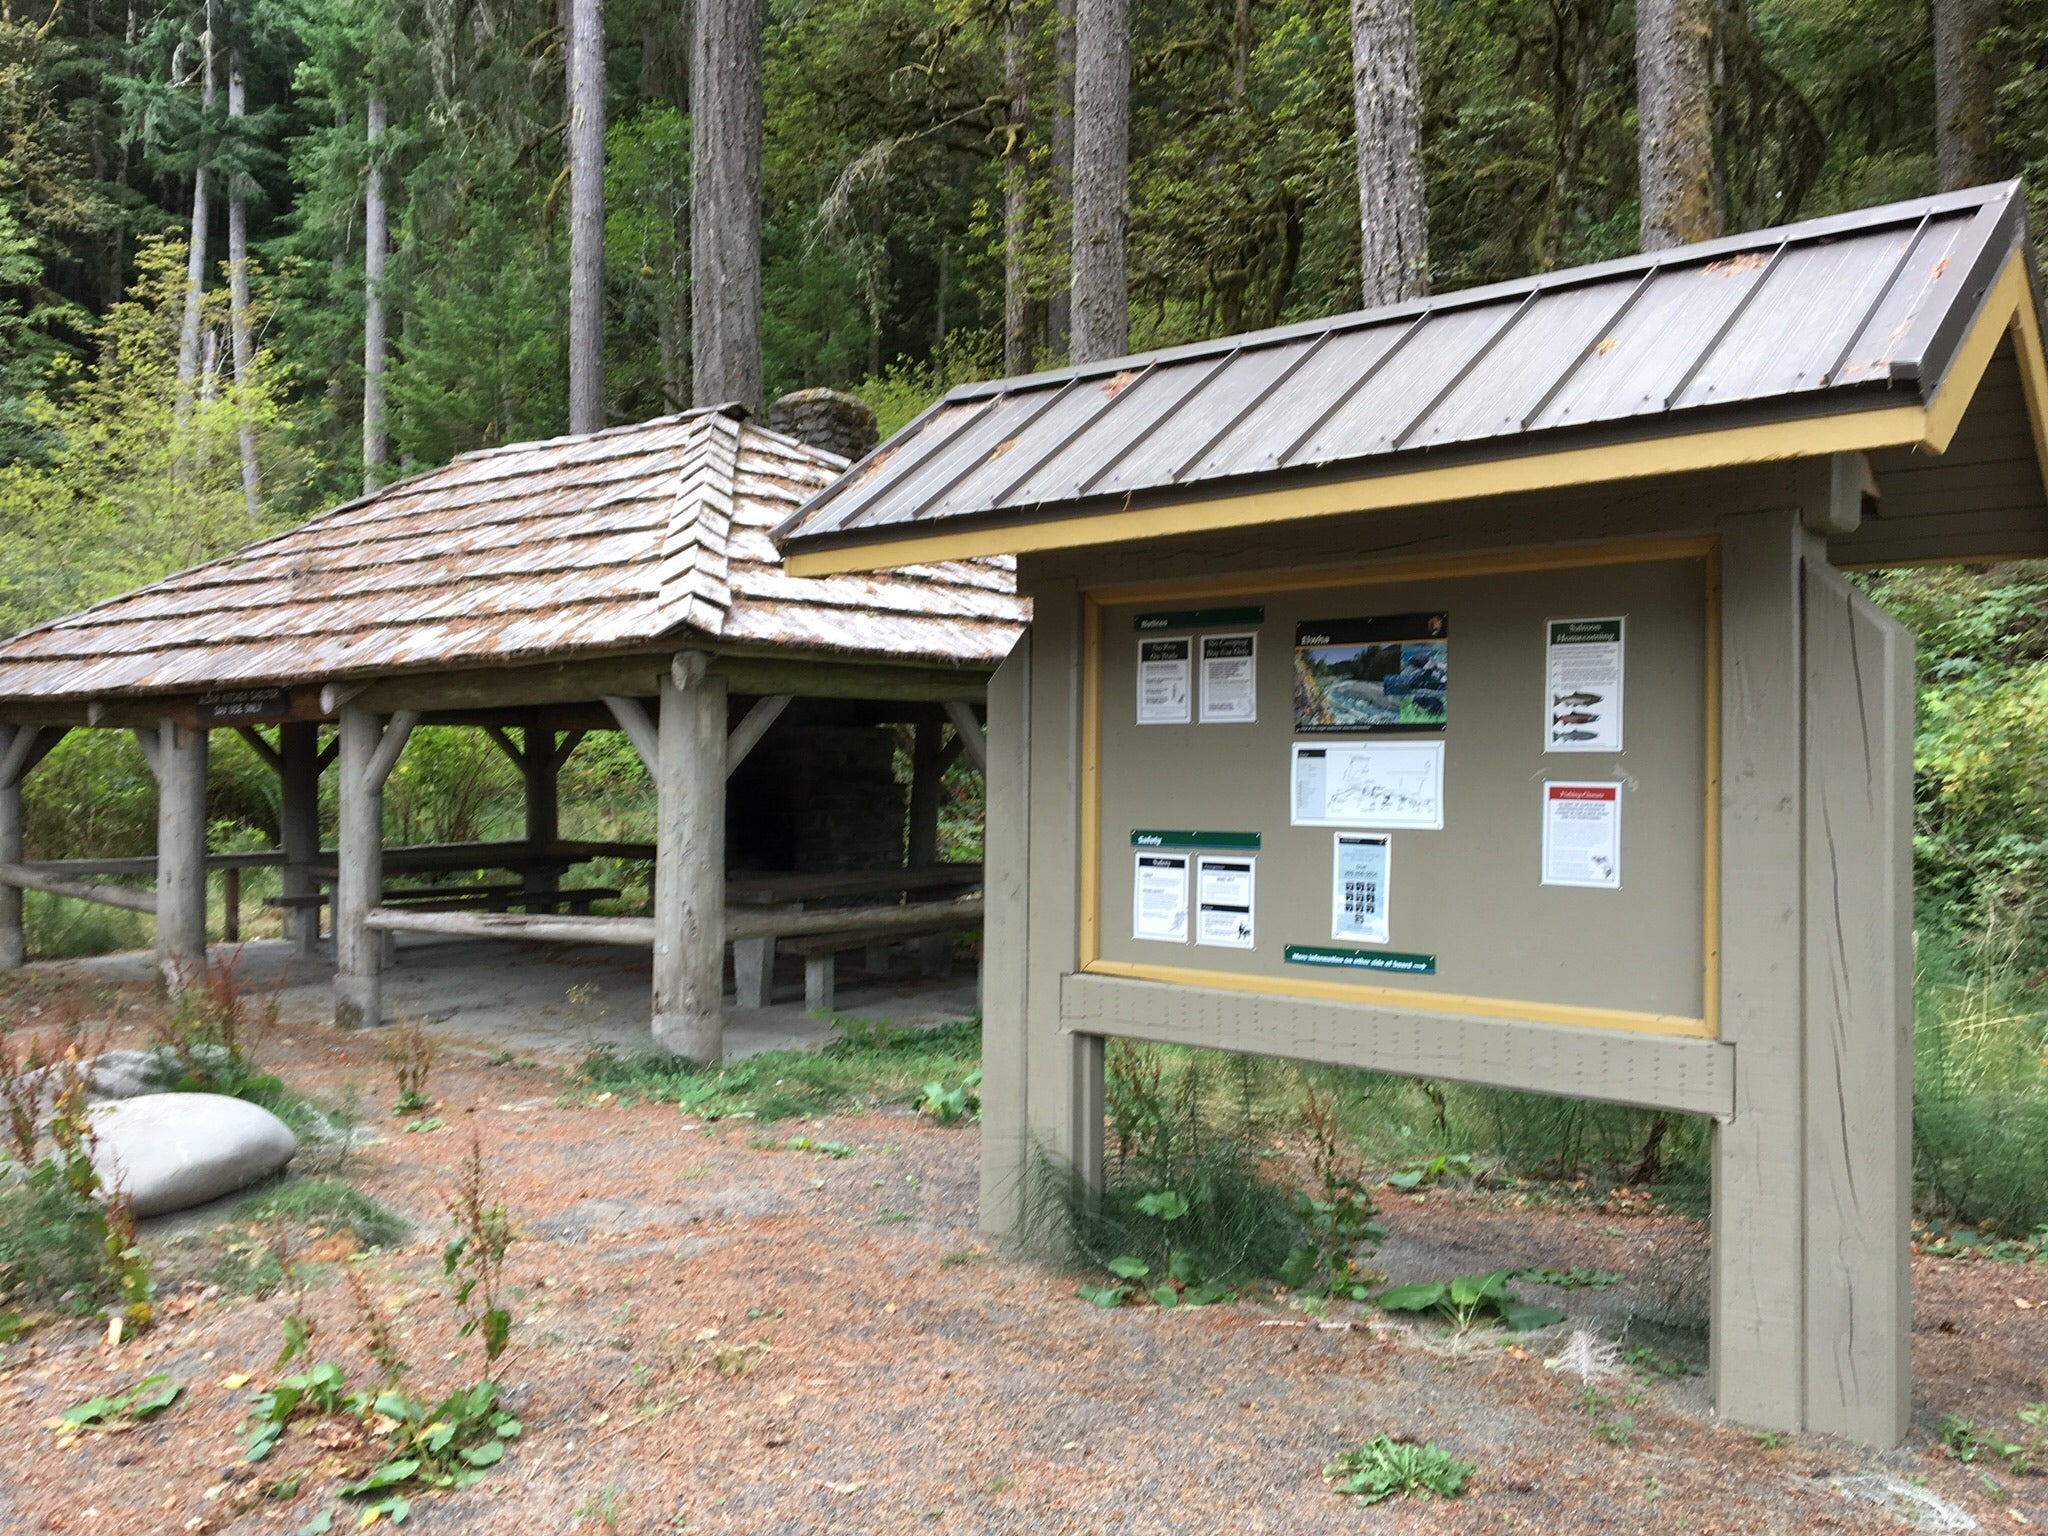 Shelter and Info board